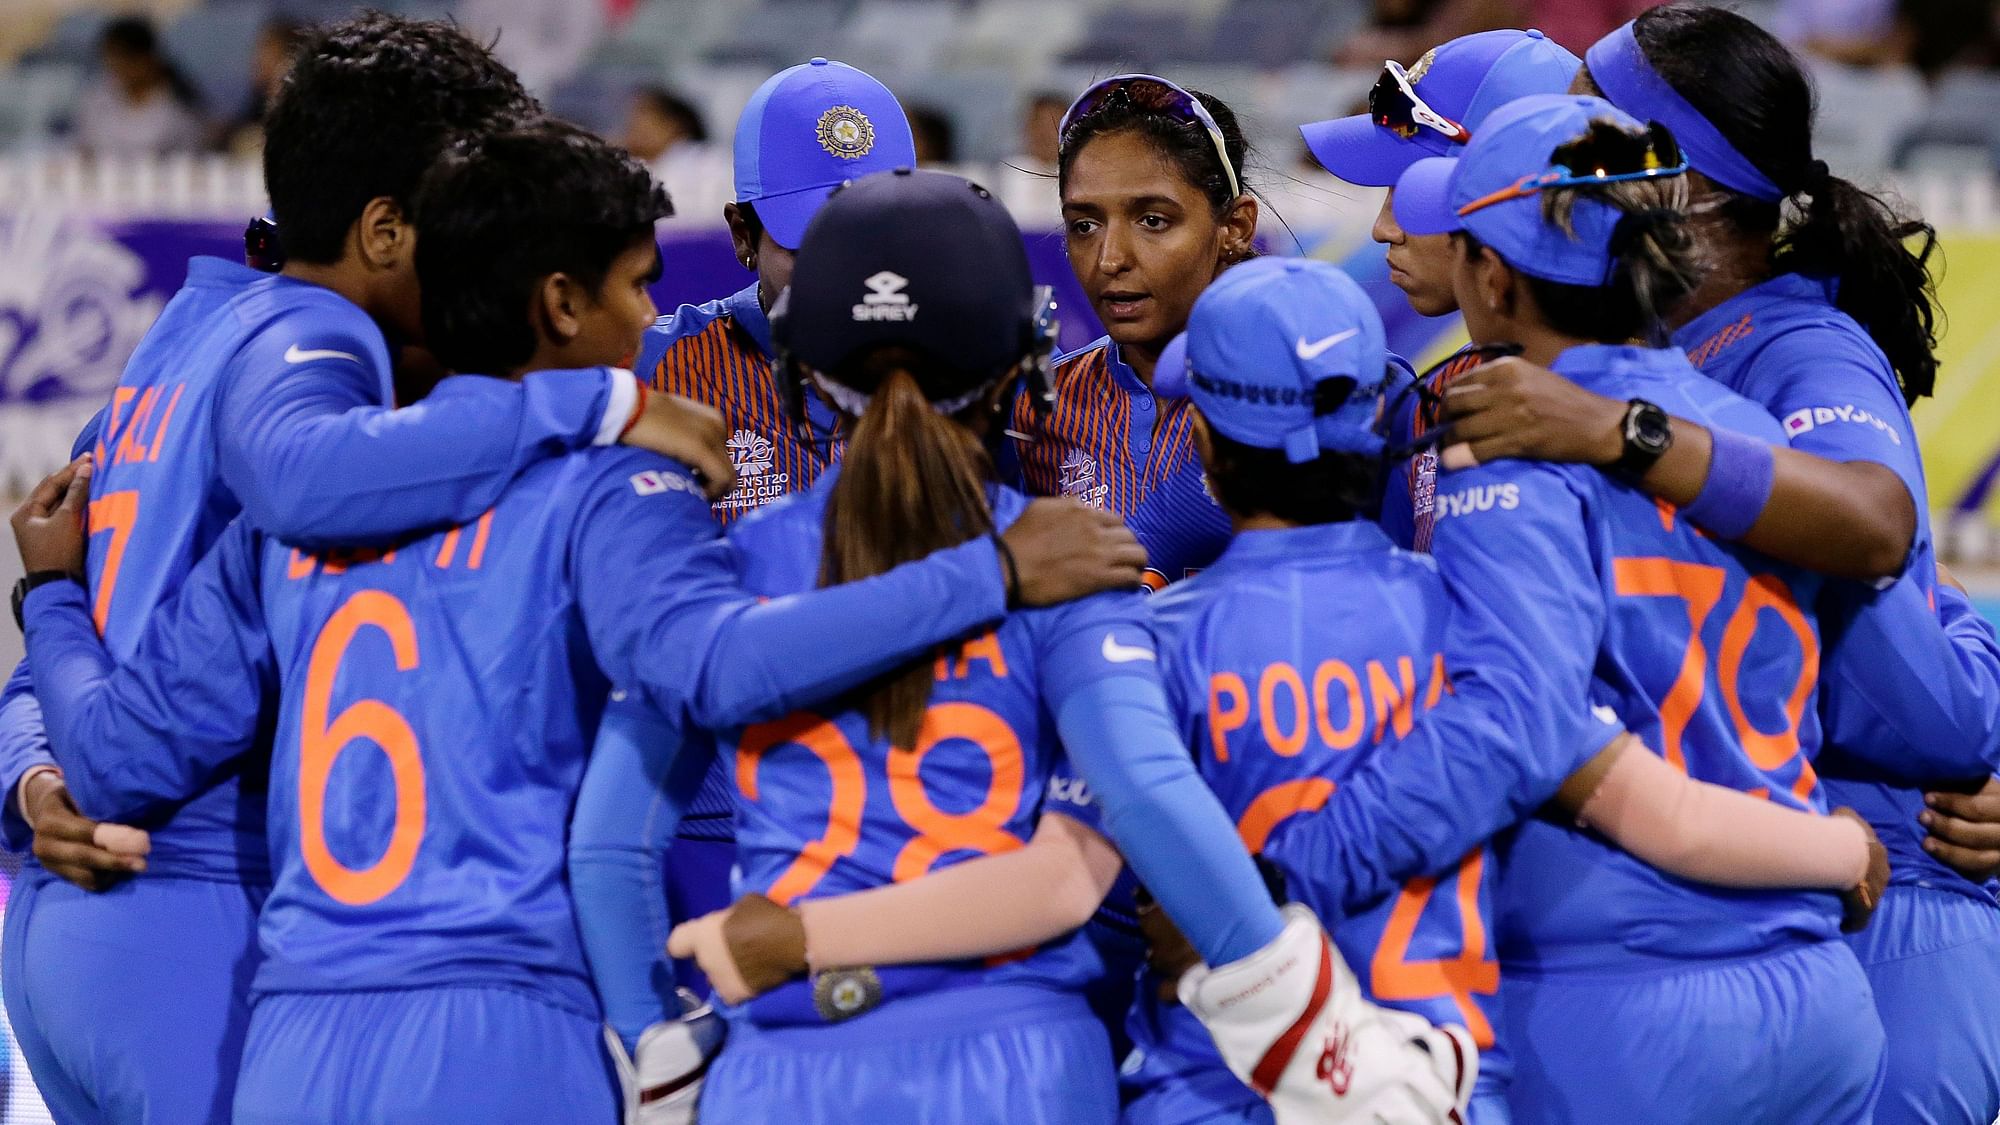 India have won both their opening encounters against Australia and Bangladesh ongoing Women’s T20 World Cup.